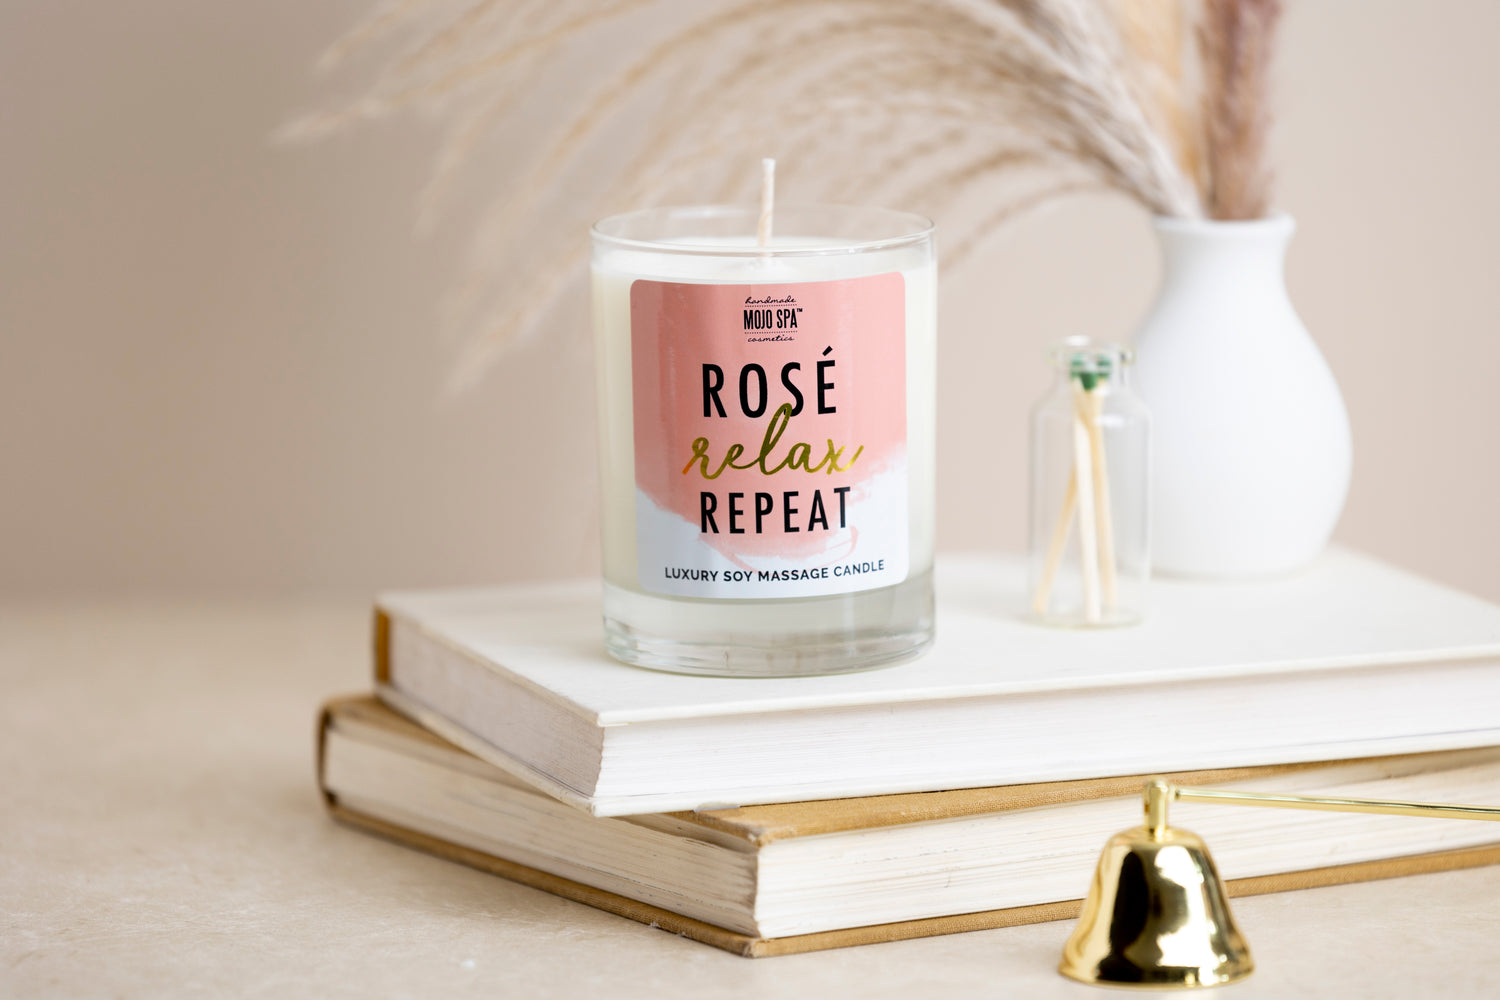 Rosé. Relax. Repeat. Luxury Soy Massage Candle